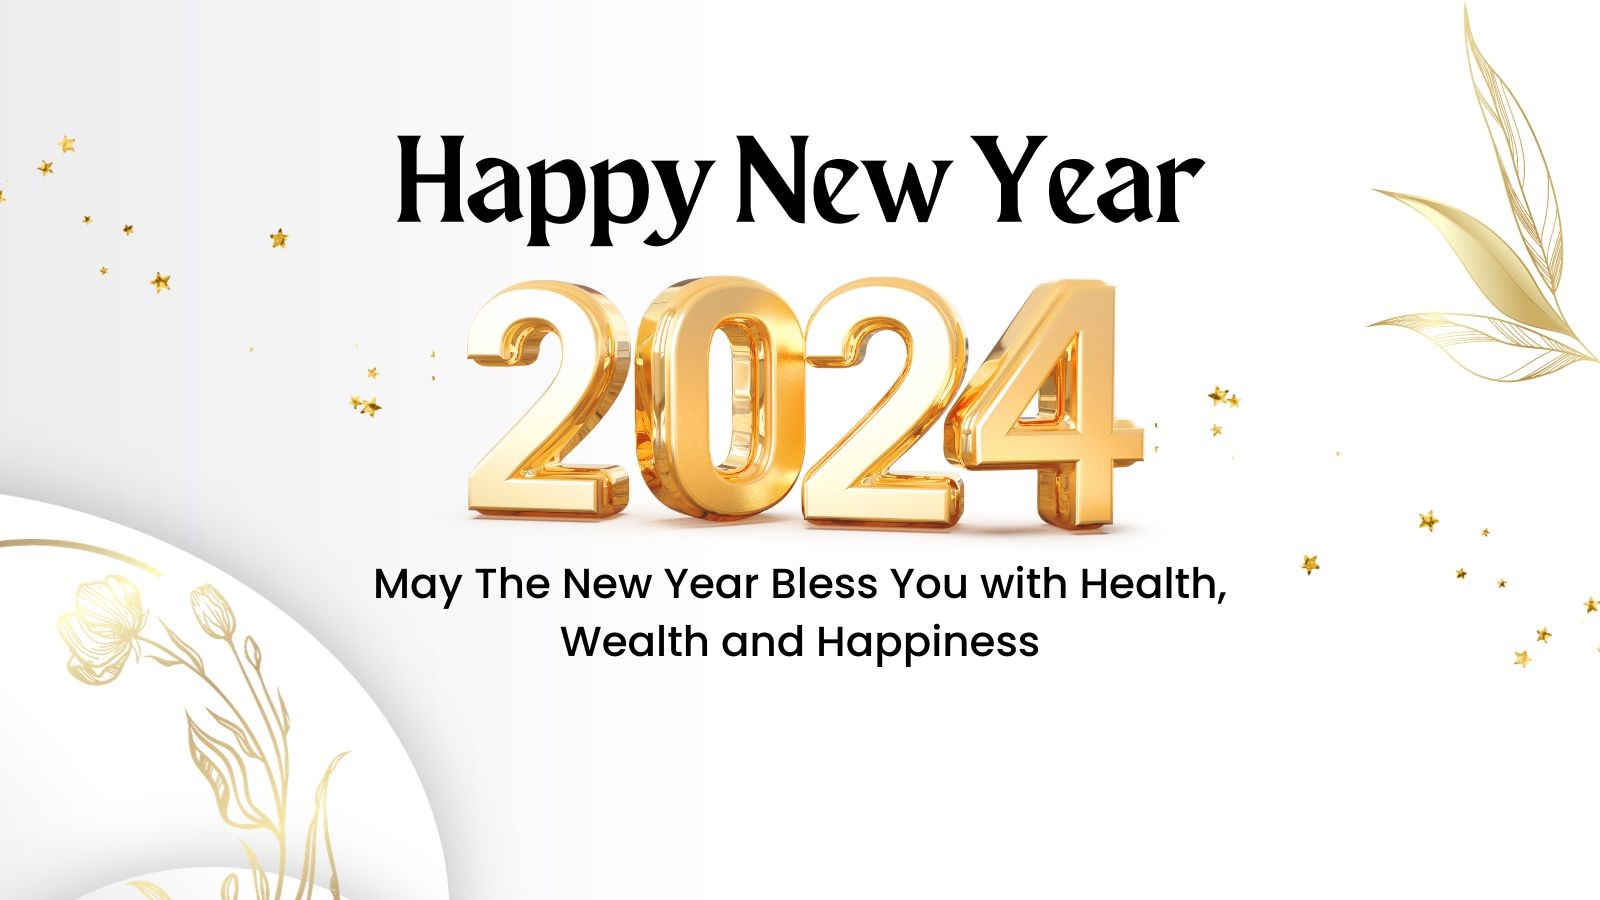 HAPPY New Year 2024 Wishes, Image, Greetings, Cards Status, and Messages